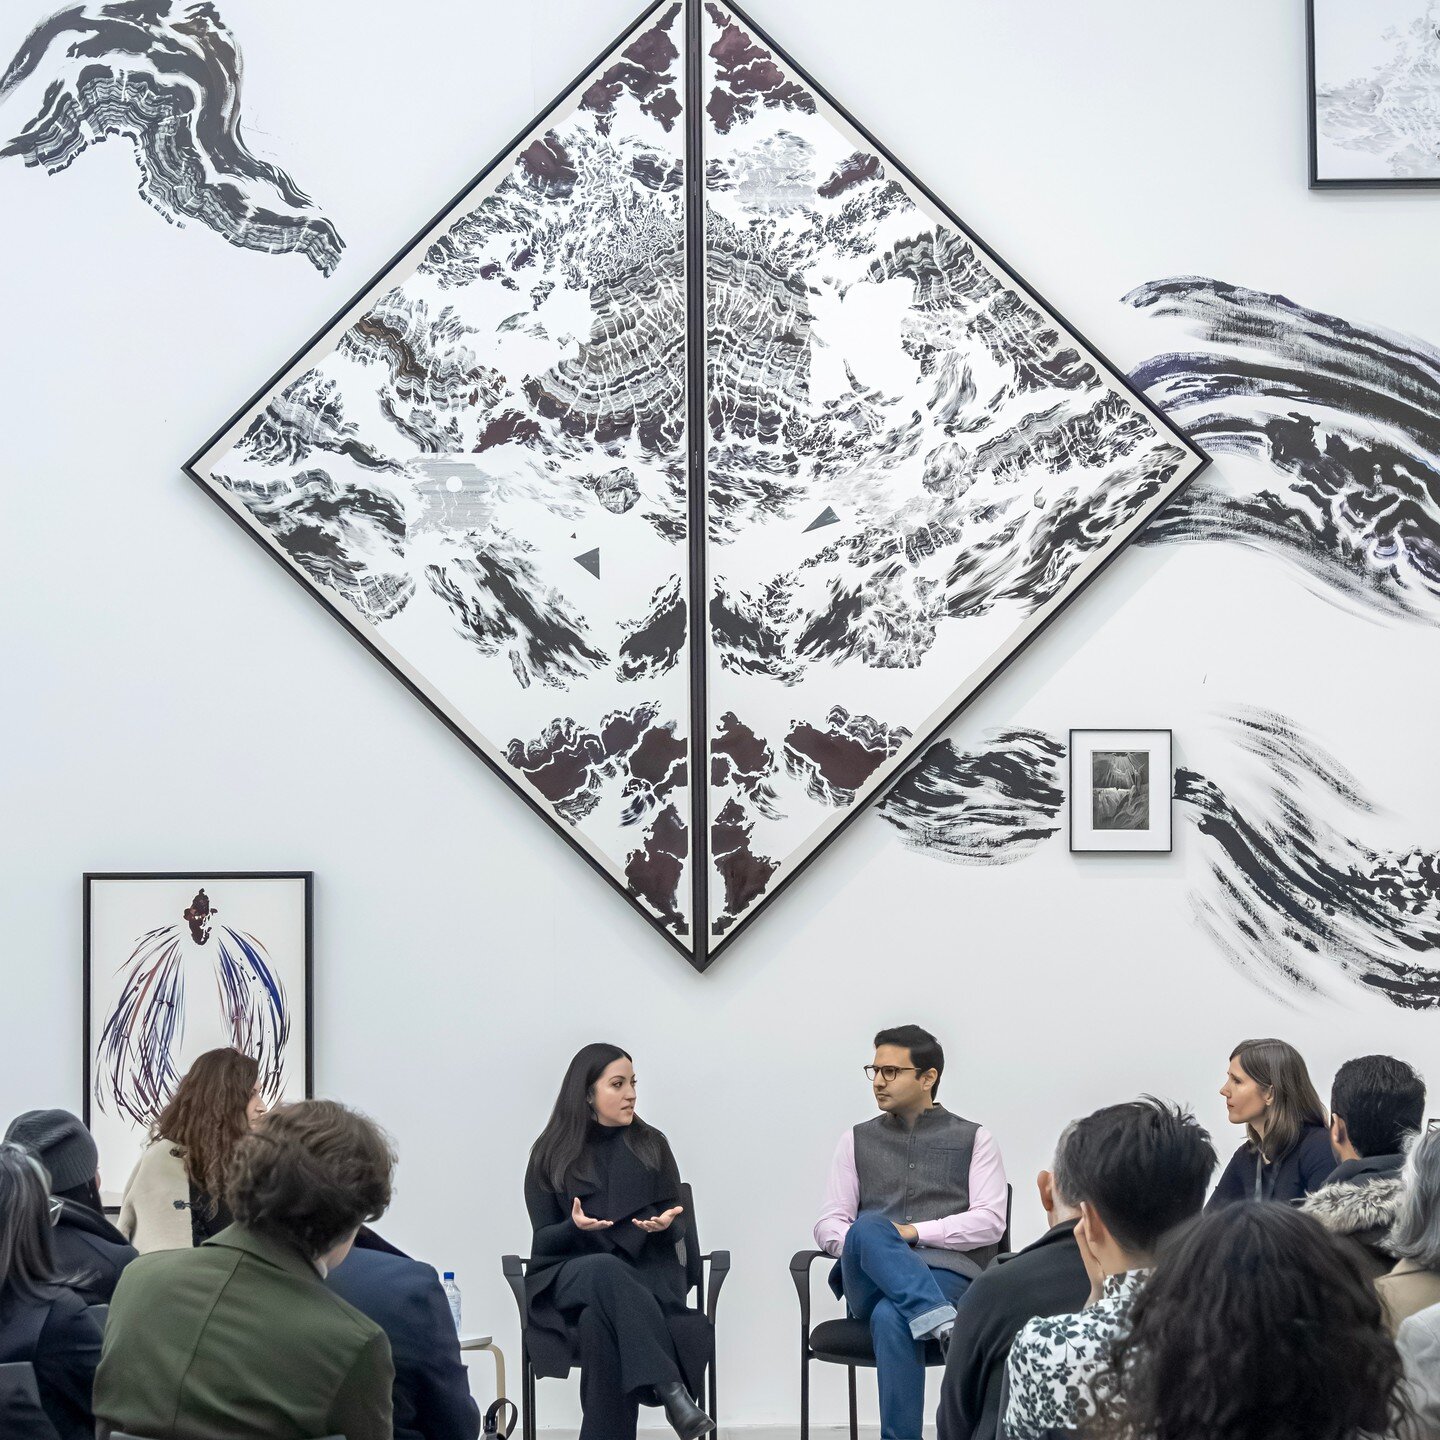 Thank you @thepowerplantto for inviting us to take part in last night's panel discussion for the inaugural Circle of Contemporaries Salons: Starting and Growing Your Art Collection! 

#DAG #ContemporaryArt #CanadianArt #ArtCollecting #Panel